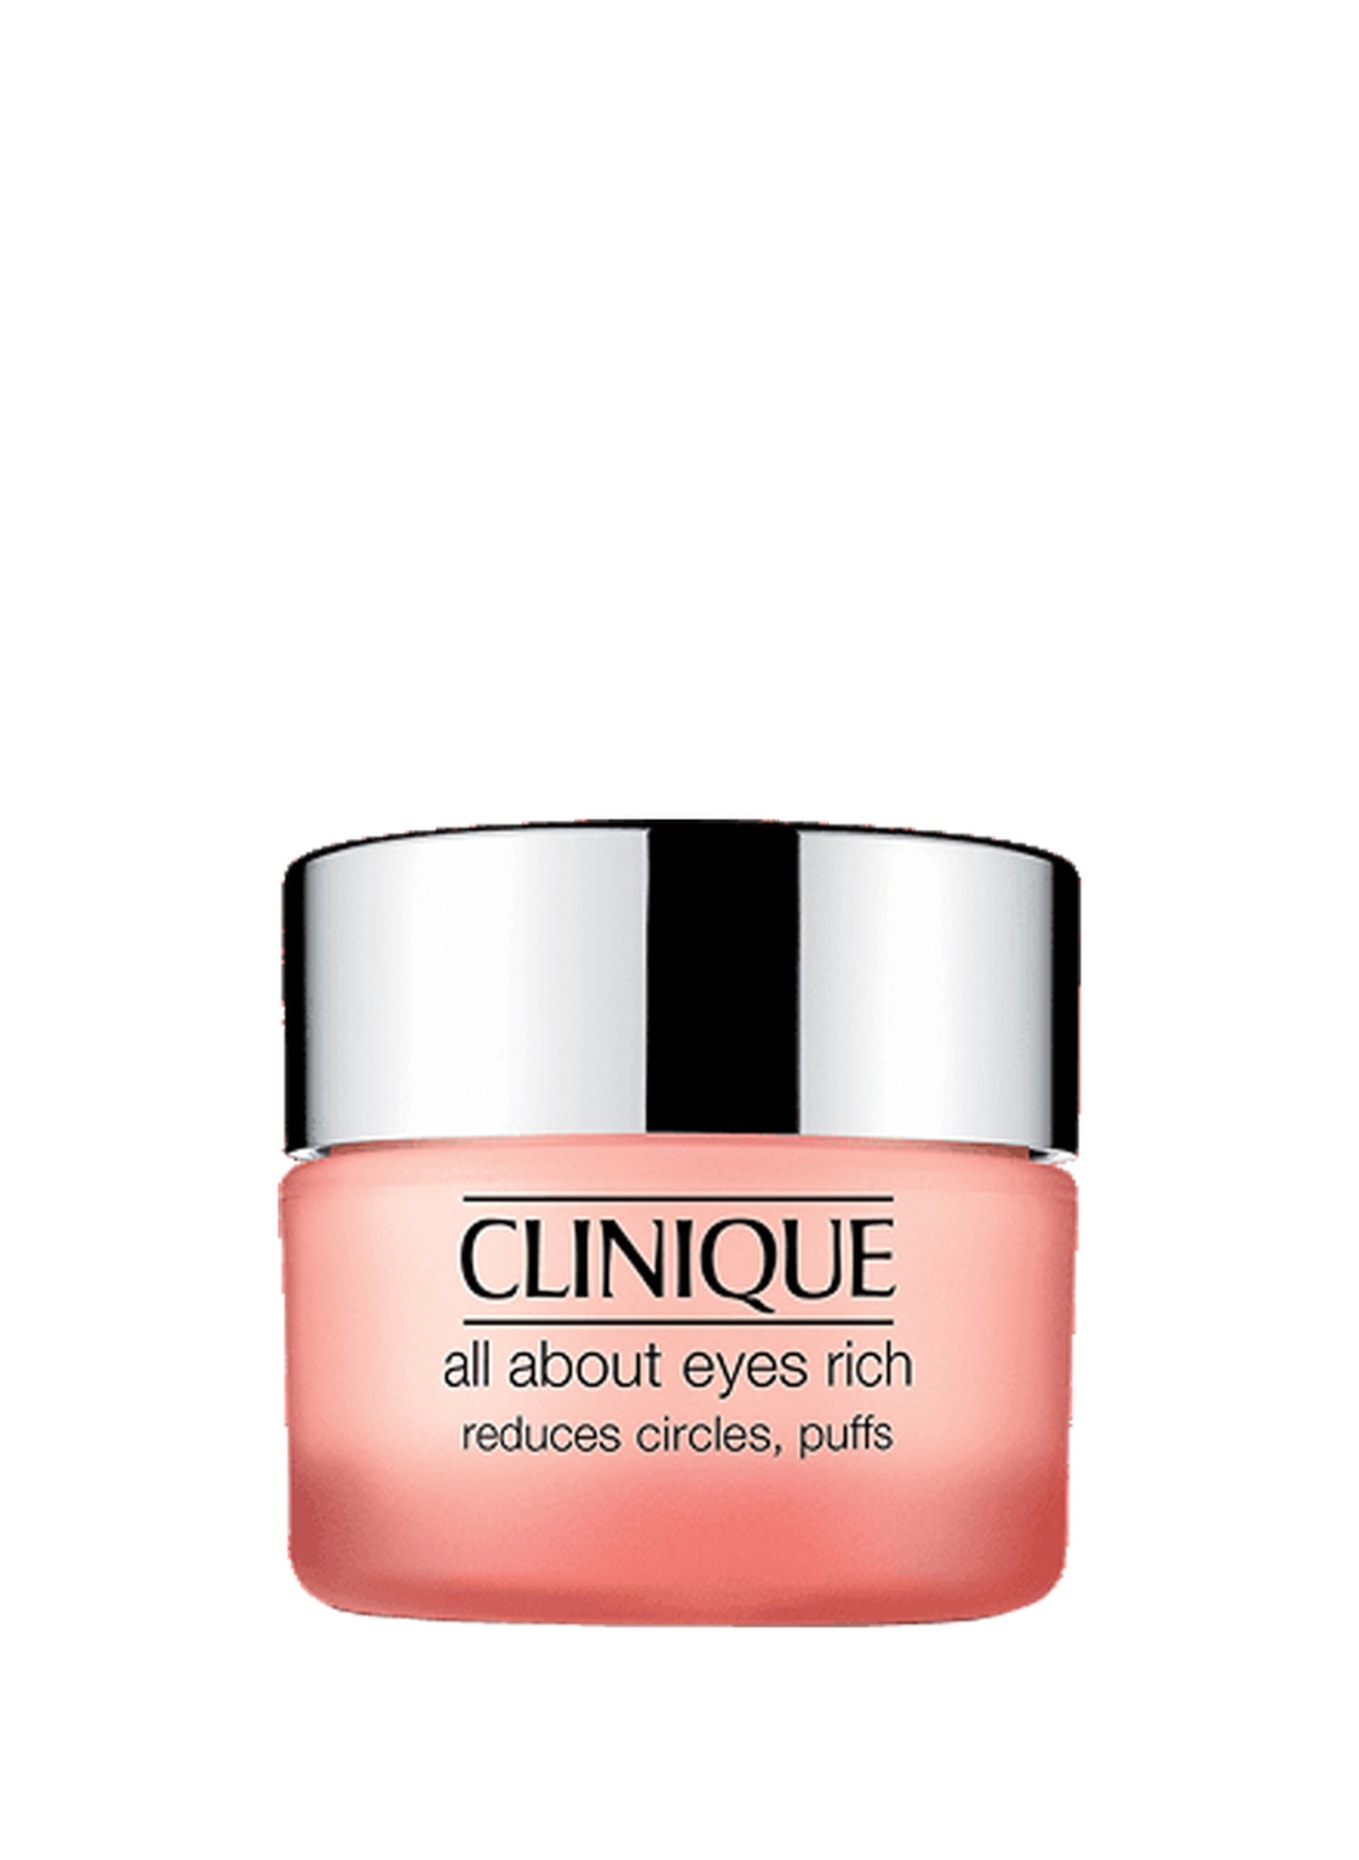 CLINIQUE ALL ABOUT EYES RICH (Obrazek 1)